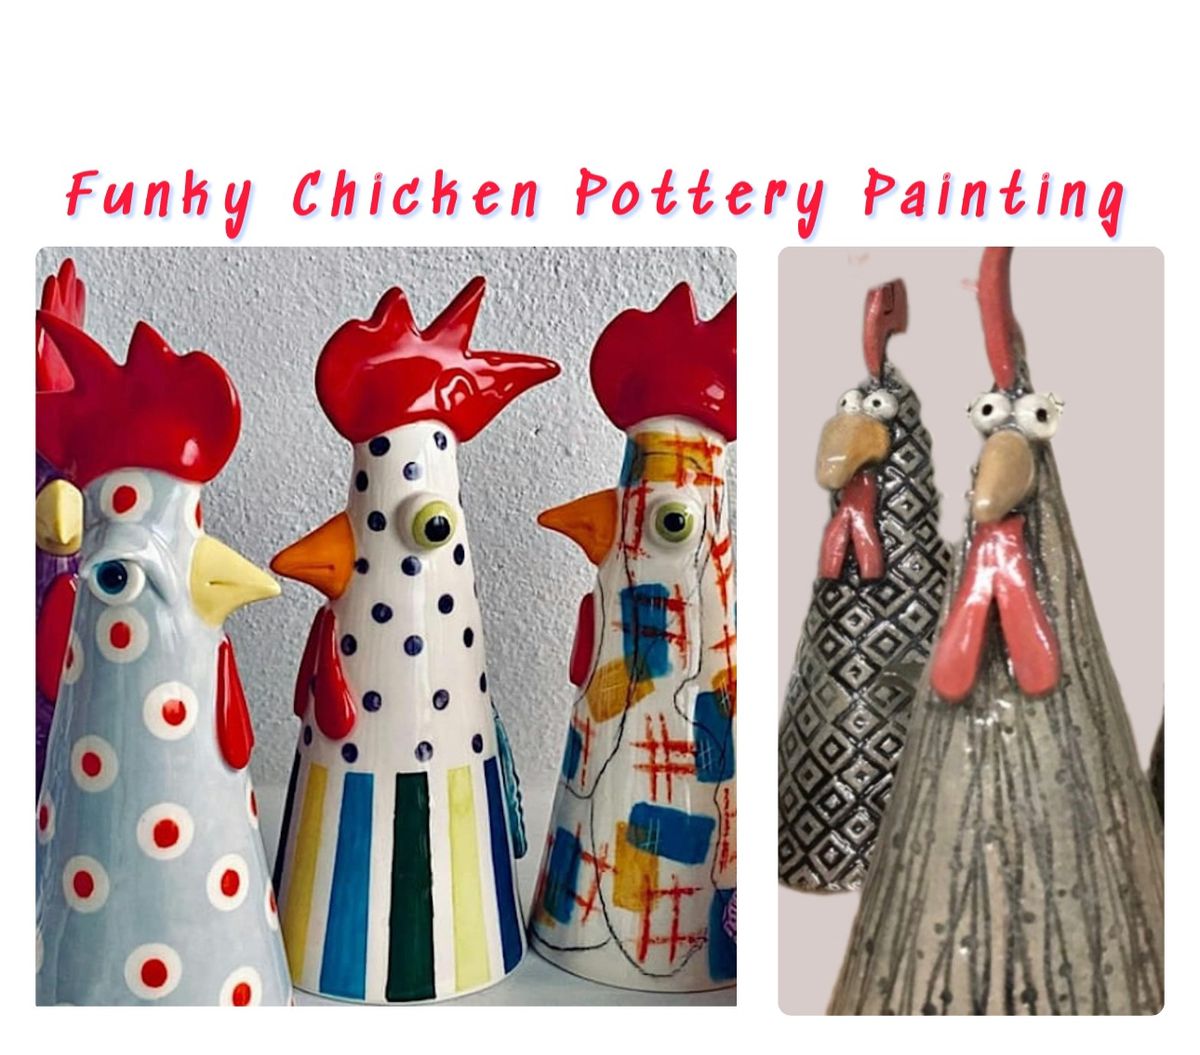 Funky Chicken Pottery Painting